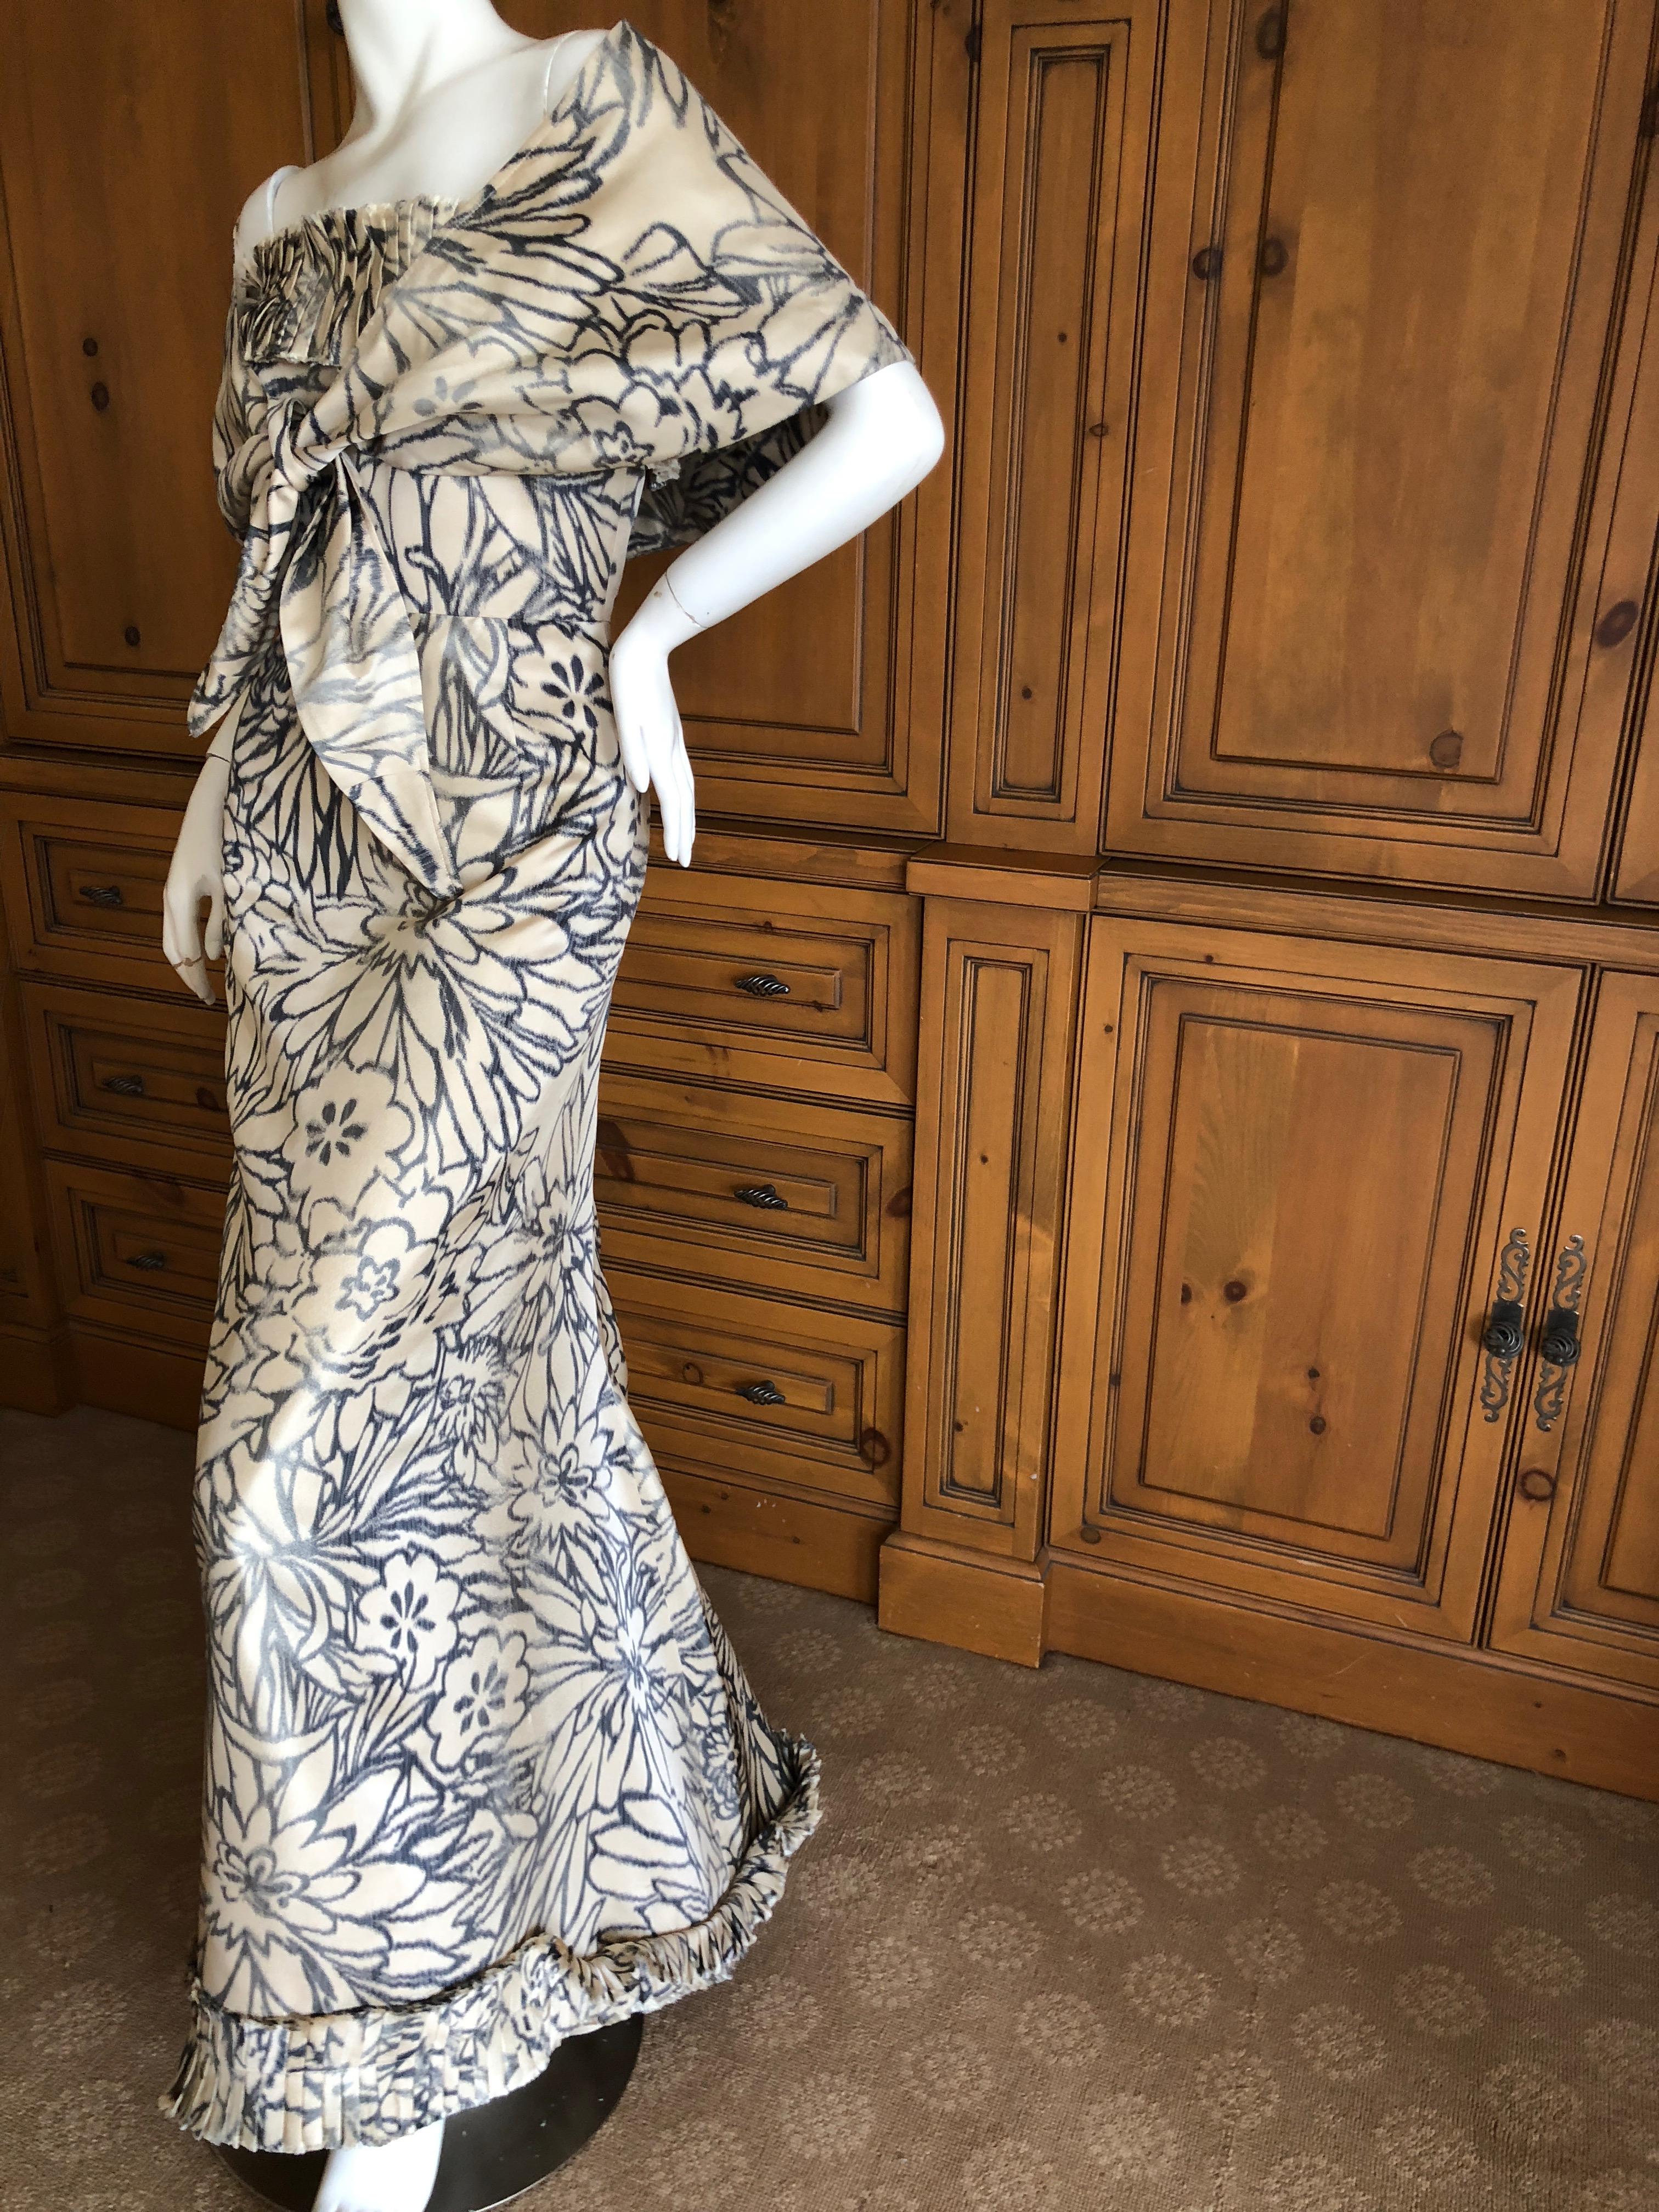 Oscar de la Renta for Bergdorf Goodman Strapless Silk Evening Dress with Shawl In Excellent Condition For Sale In Cloverdale, CA